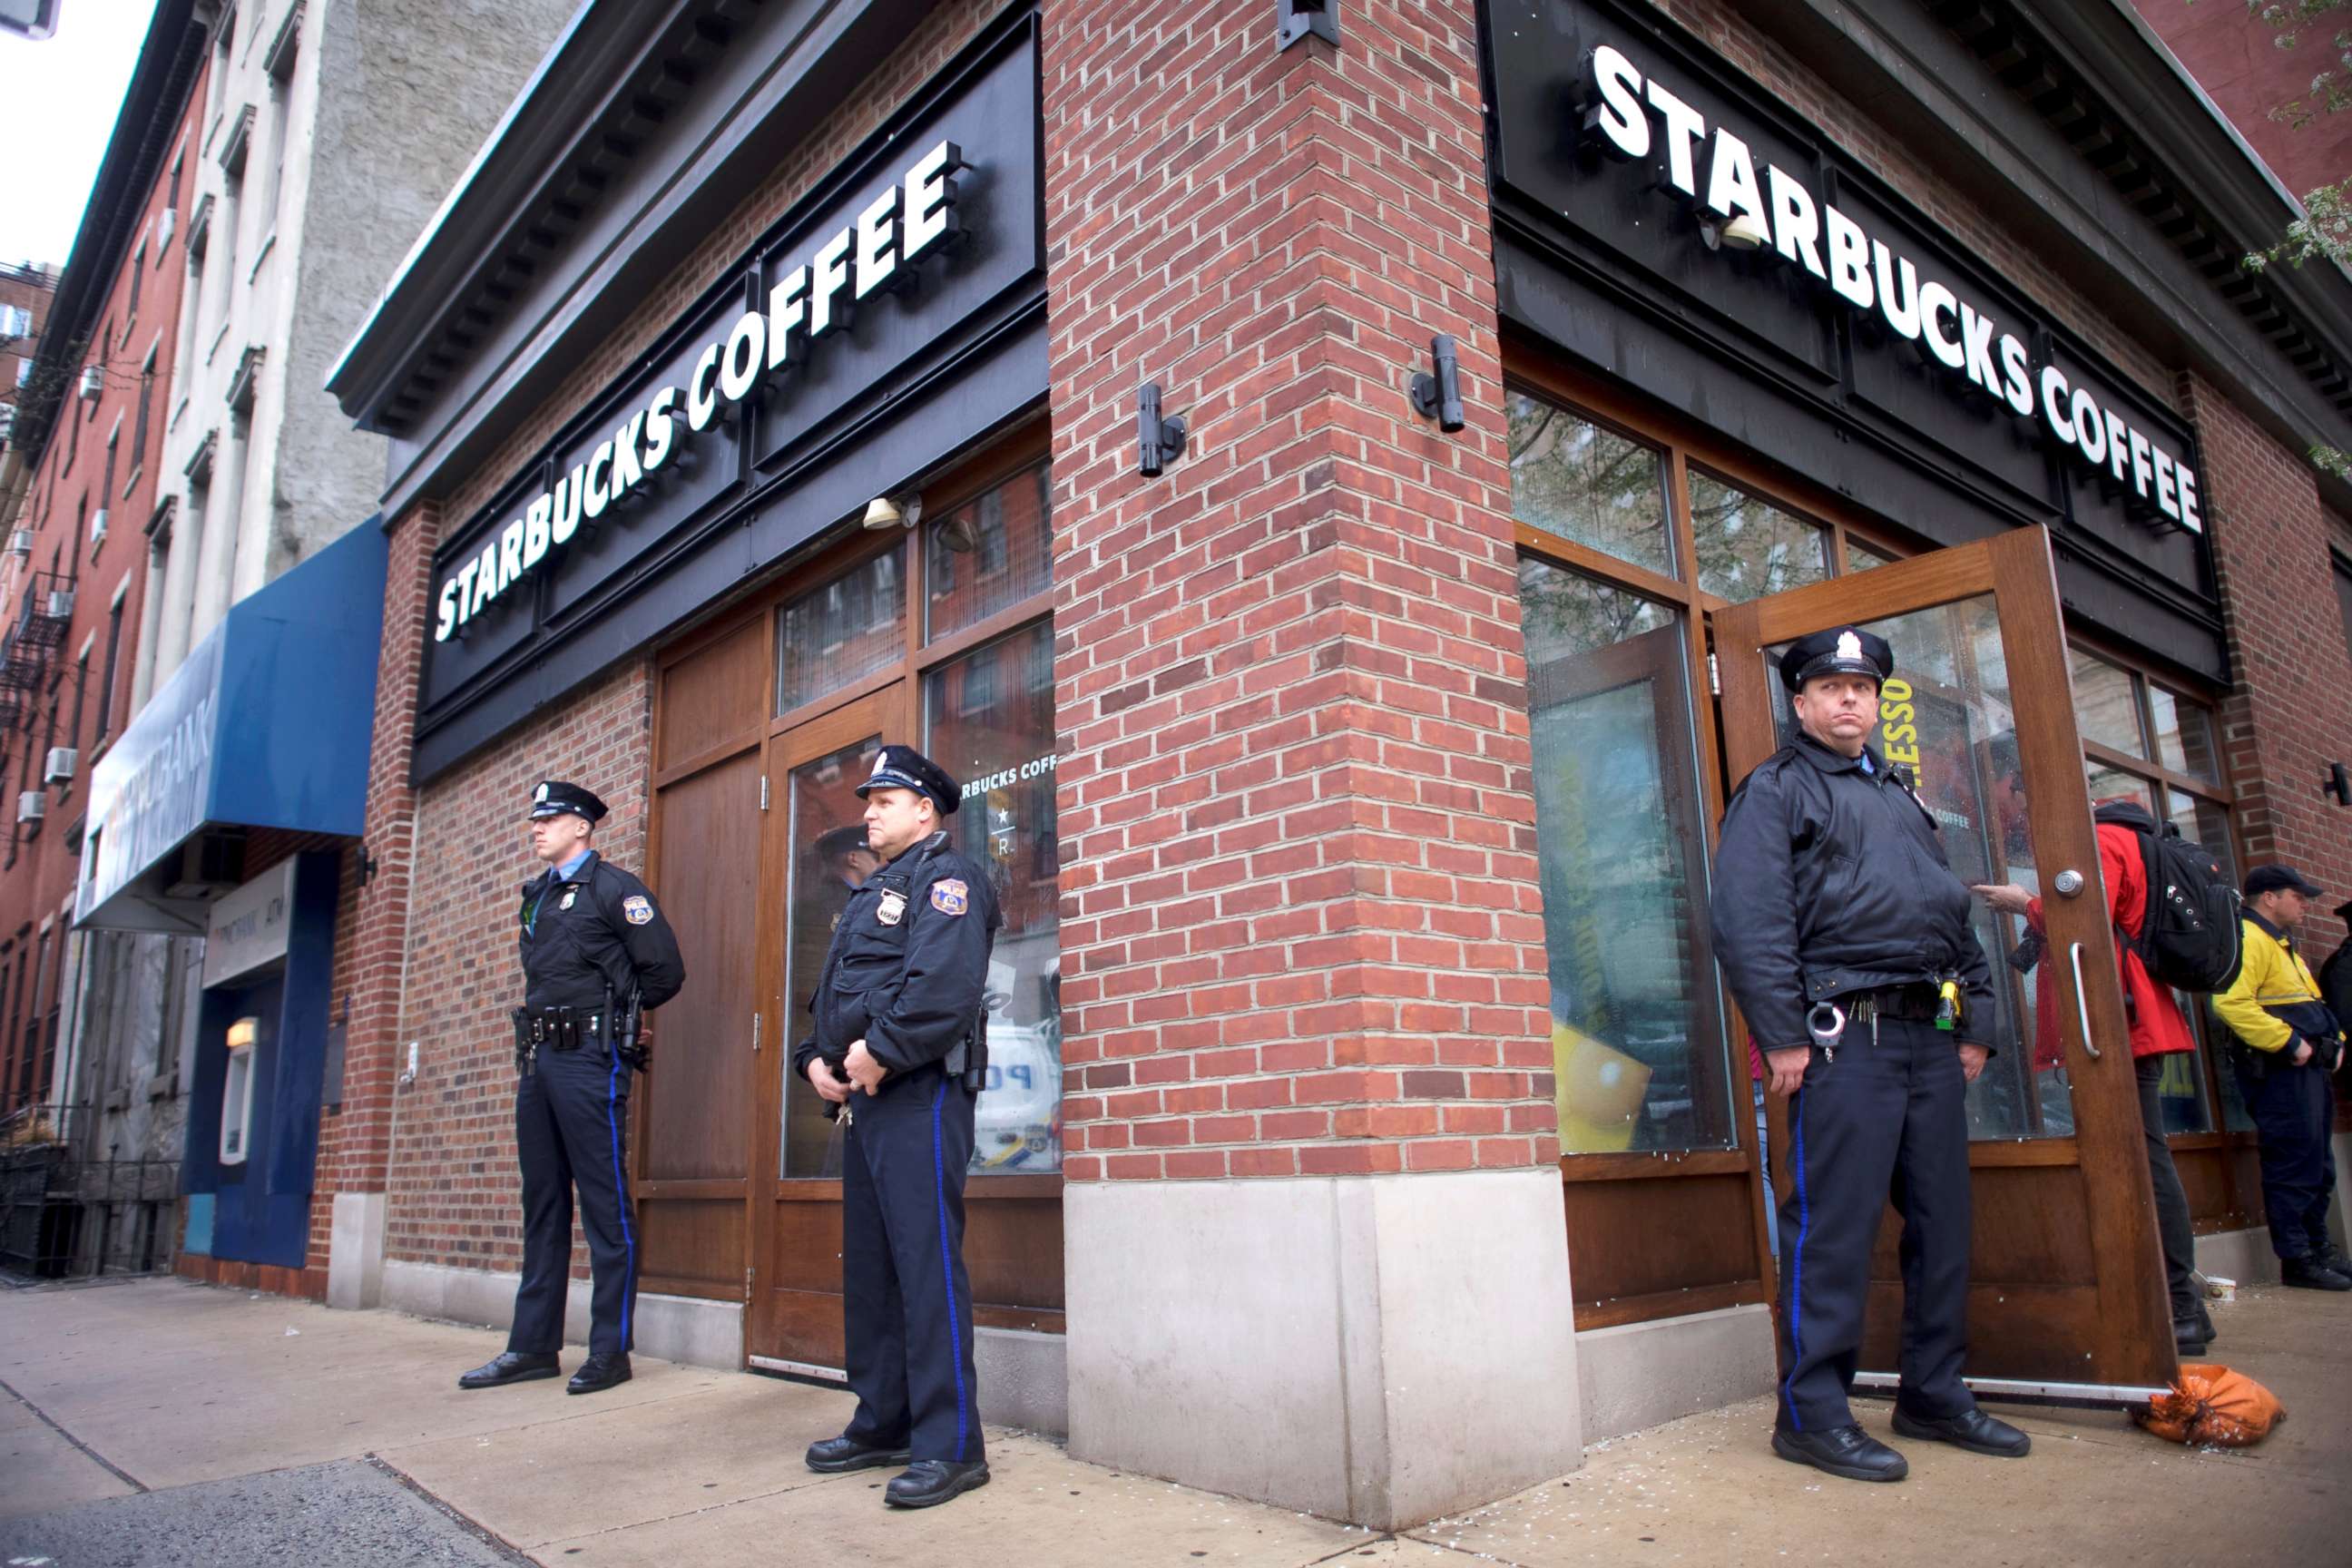 PHOTO: Police officers monitor activity outside as protestors demonstrate inside a Center City Starbucks, where two black men were arrested, in Philadelphia, April 16, 2018.